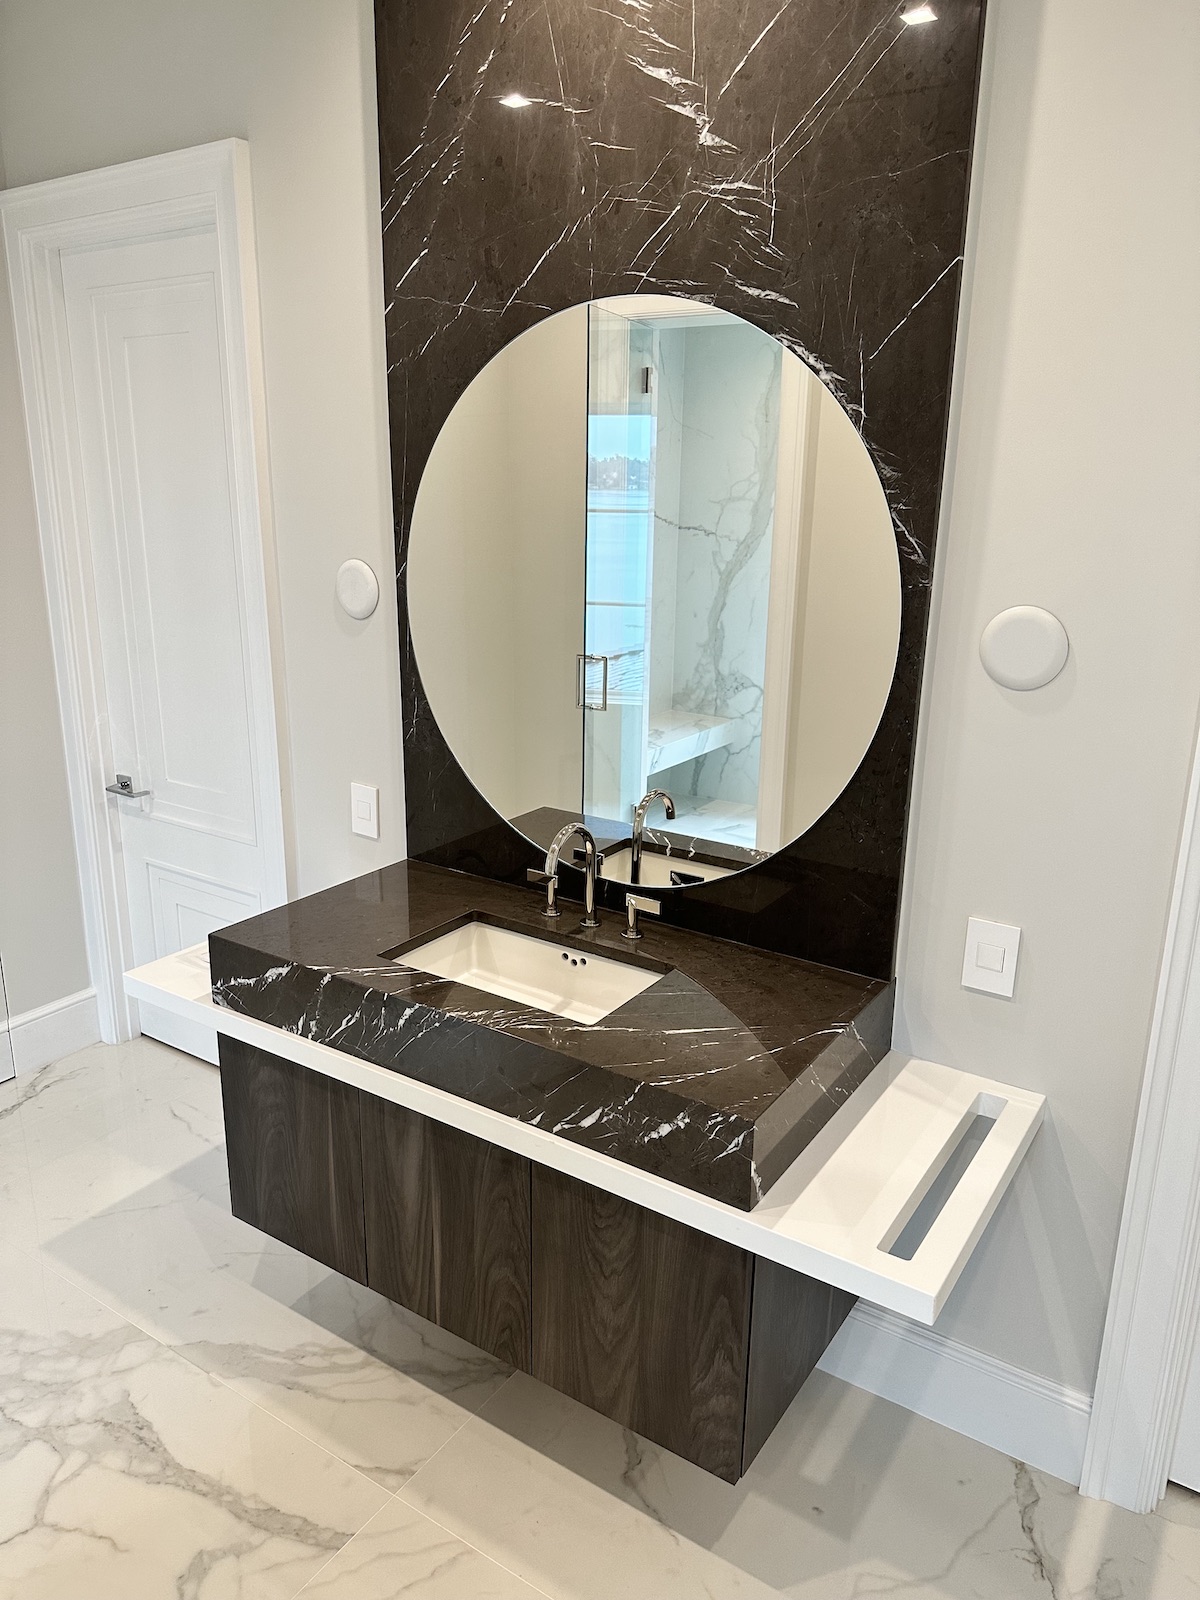 The bathroom vanity countertops of your dreams – but which material?